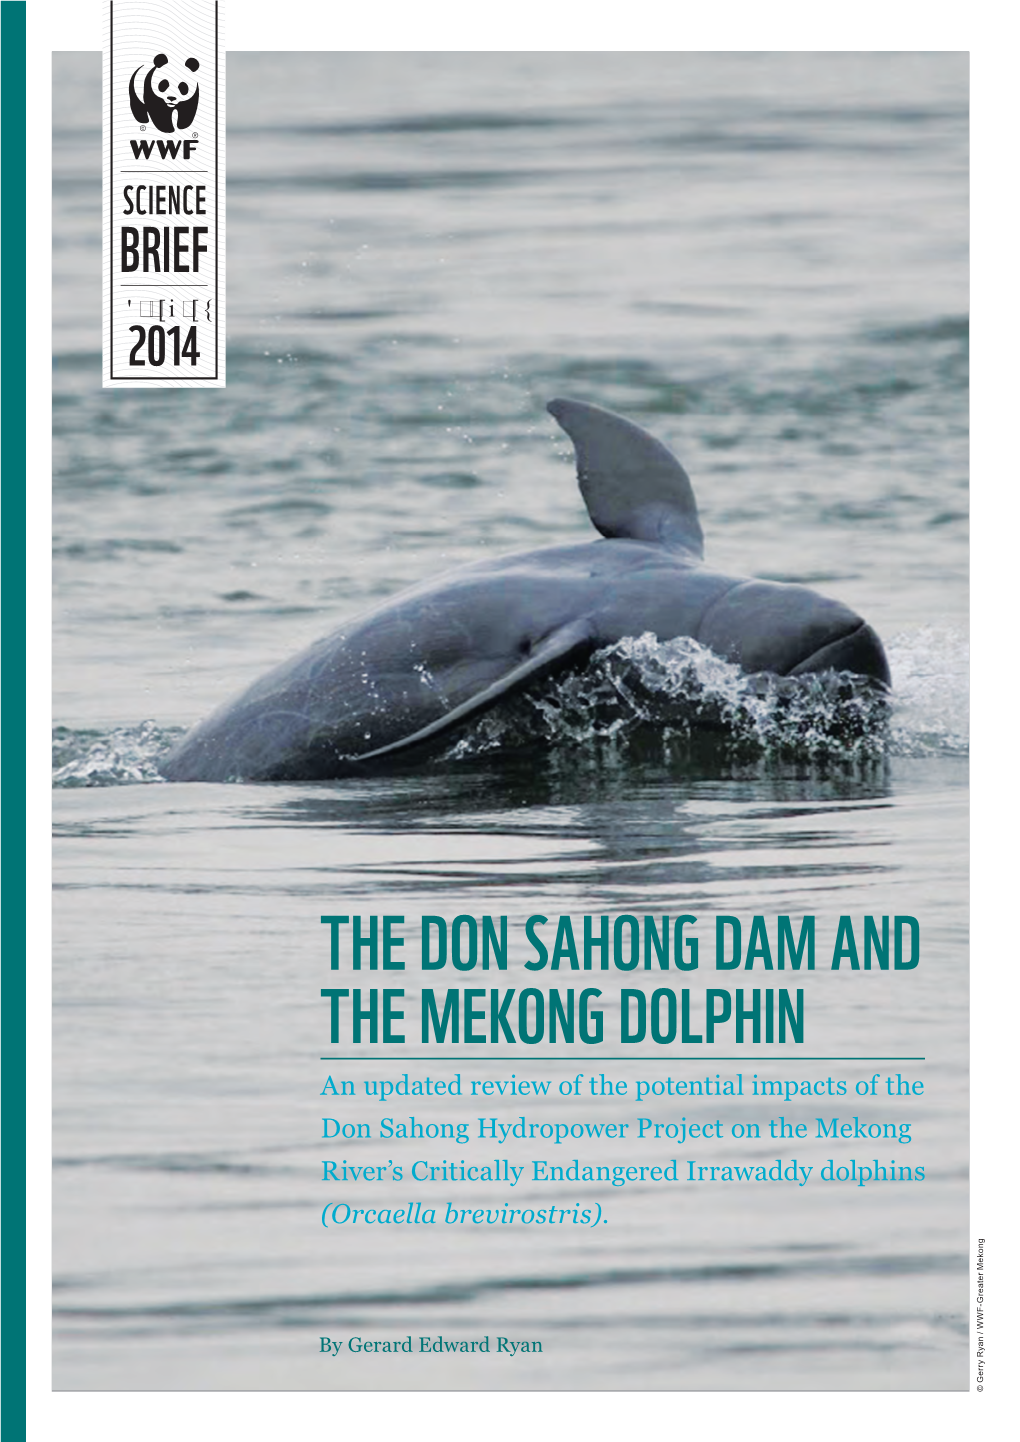 The Don Sahong Dam and the Mekong Dolphin